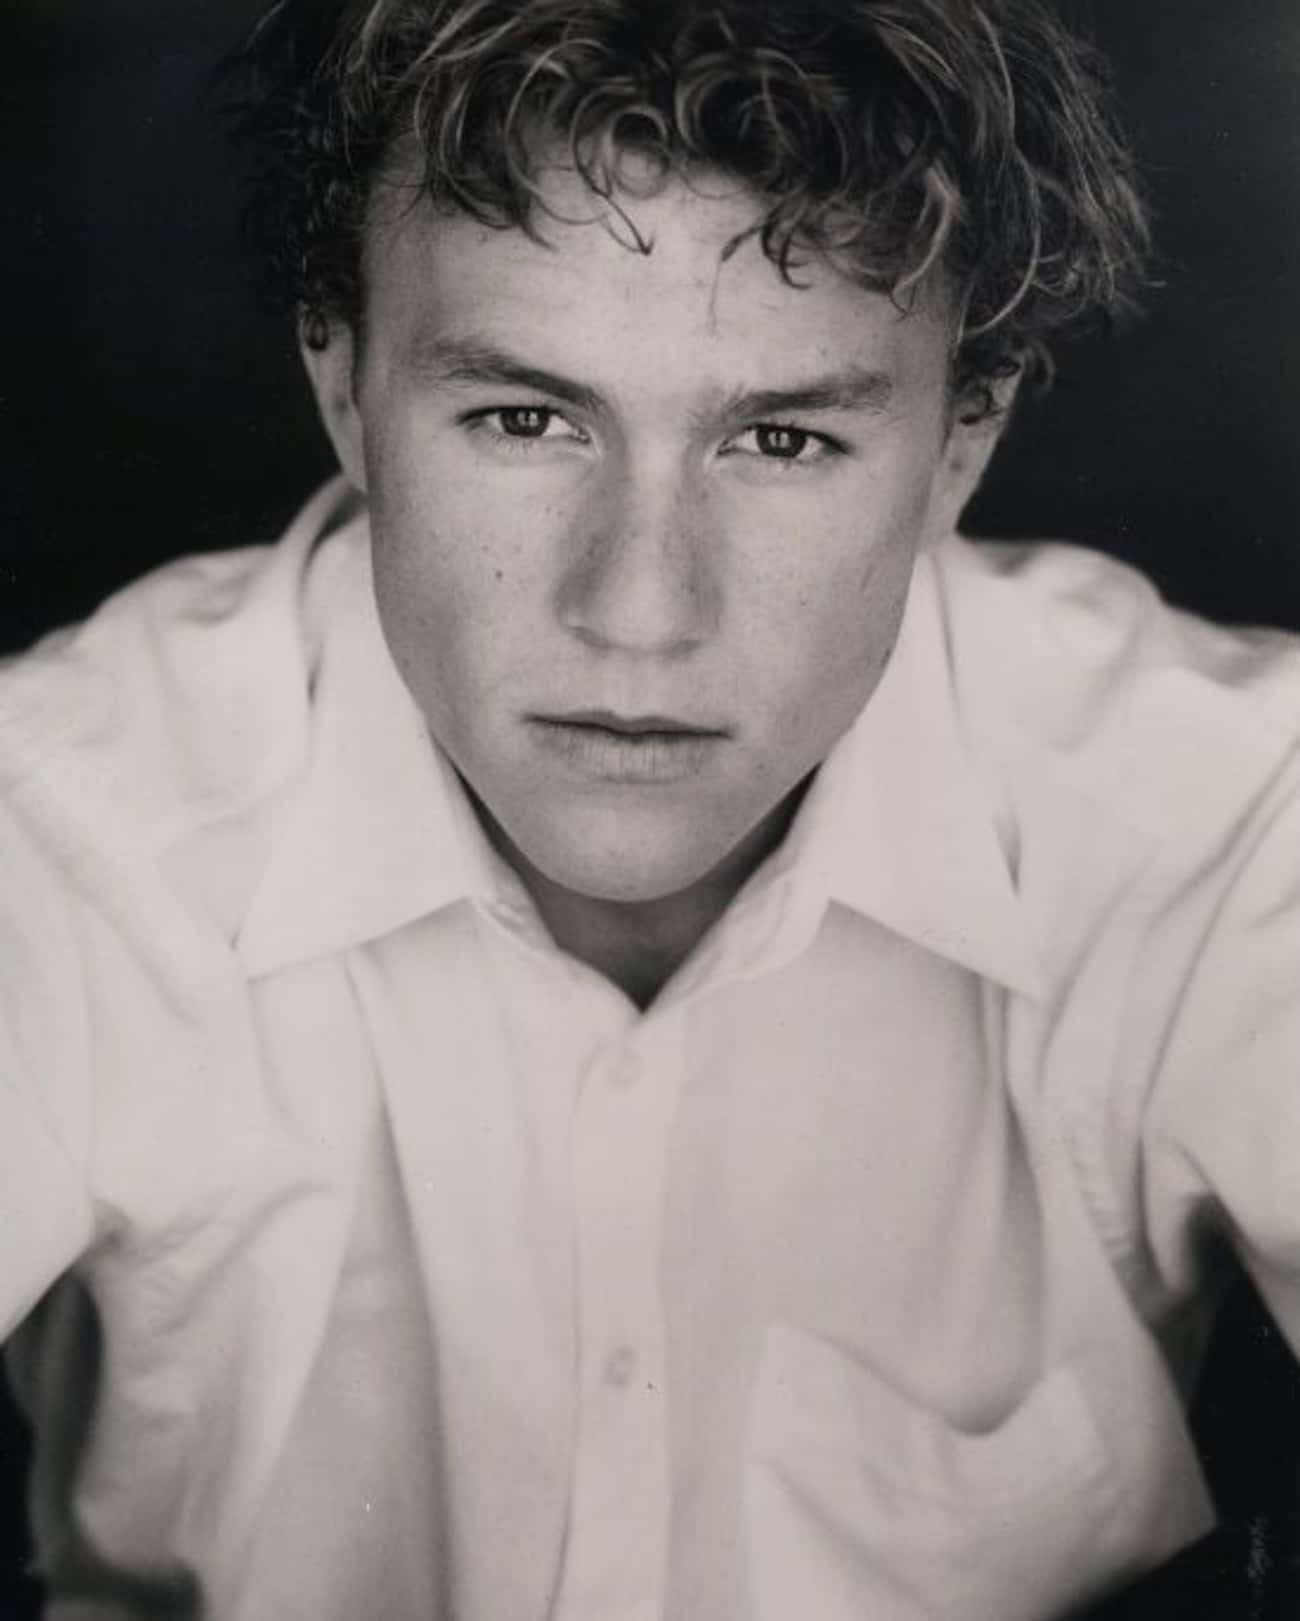 Young Heath Ledger in White Buttondown as a Teen